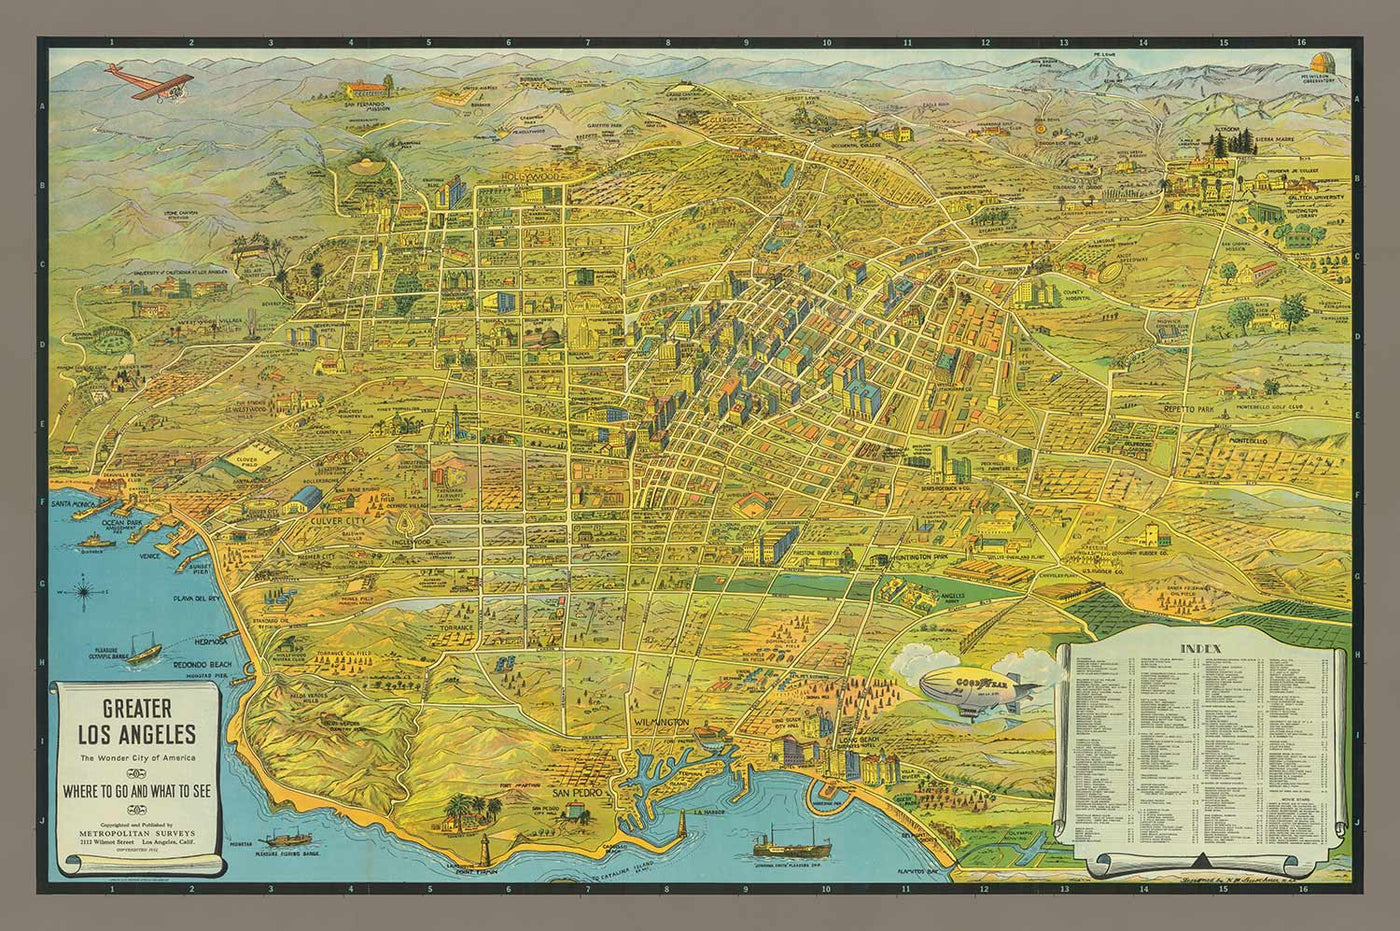 Old Map of Los Angeles, 1932 - Pictorial Summer Olympics Chart - Beaches, Hollywood, Downtown, Pasadena